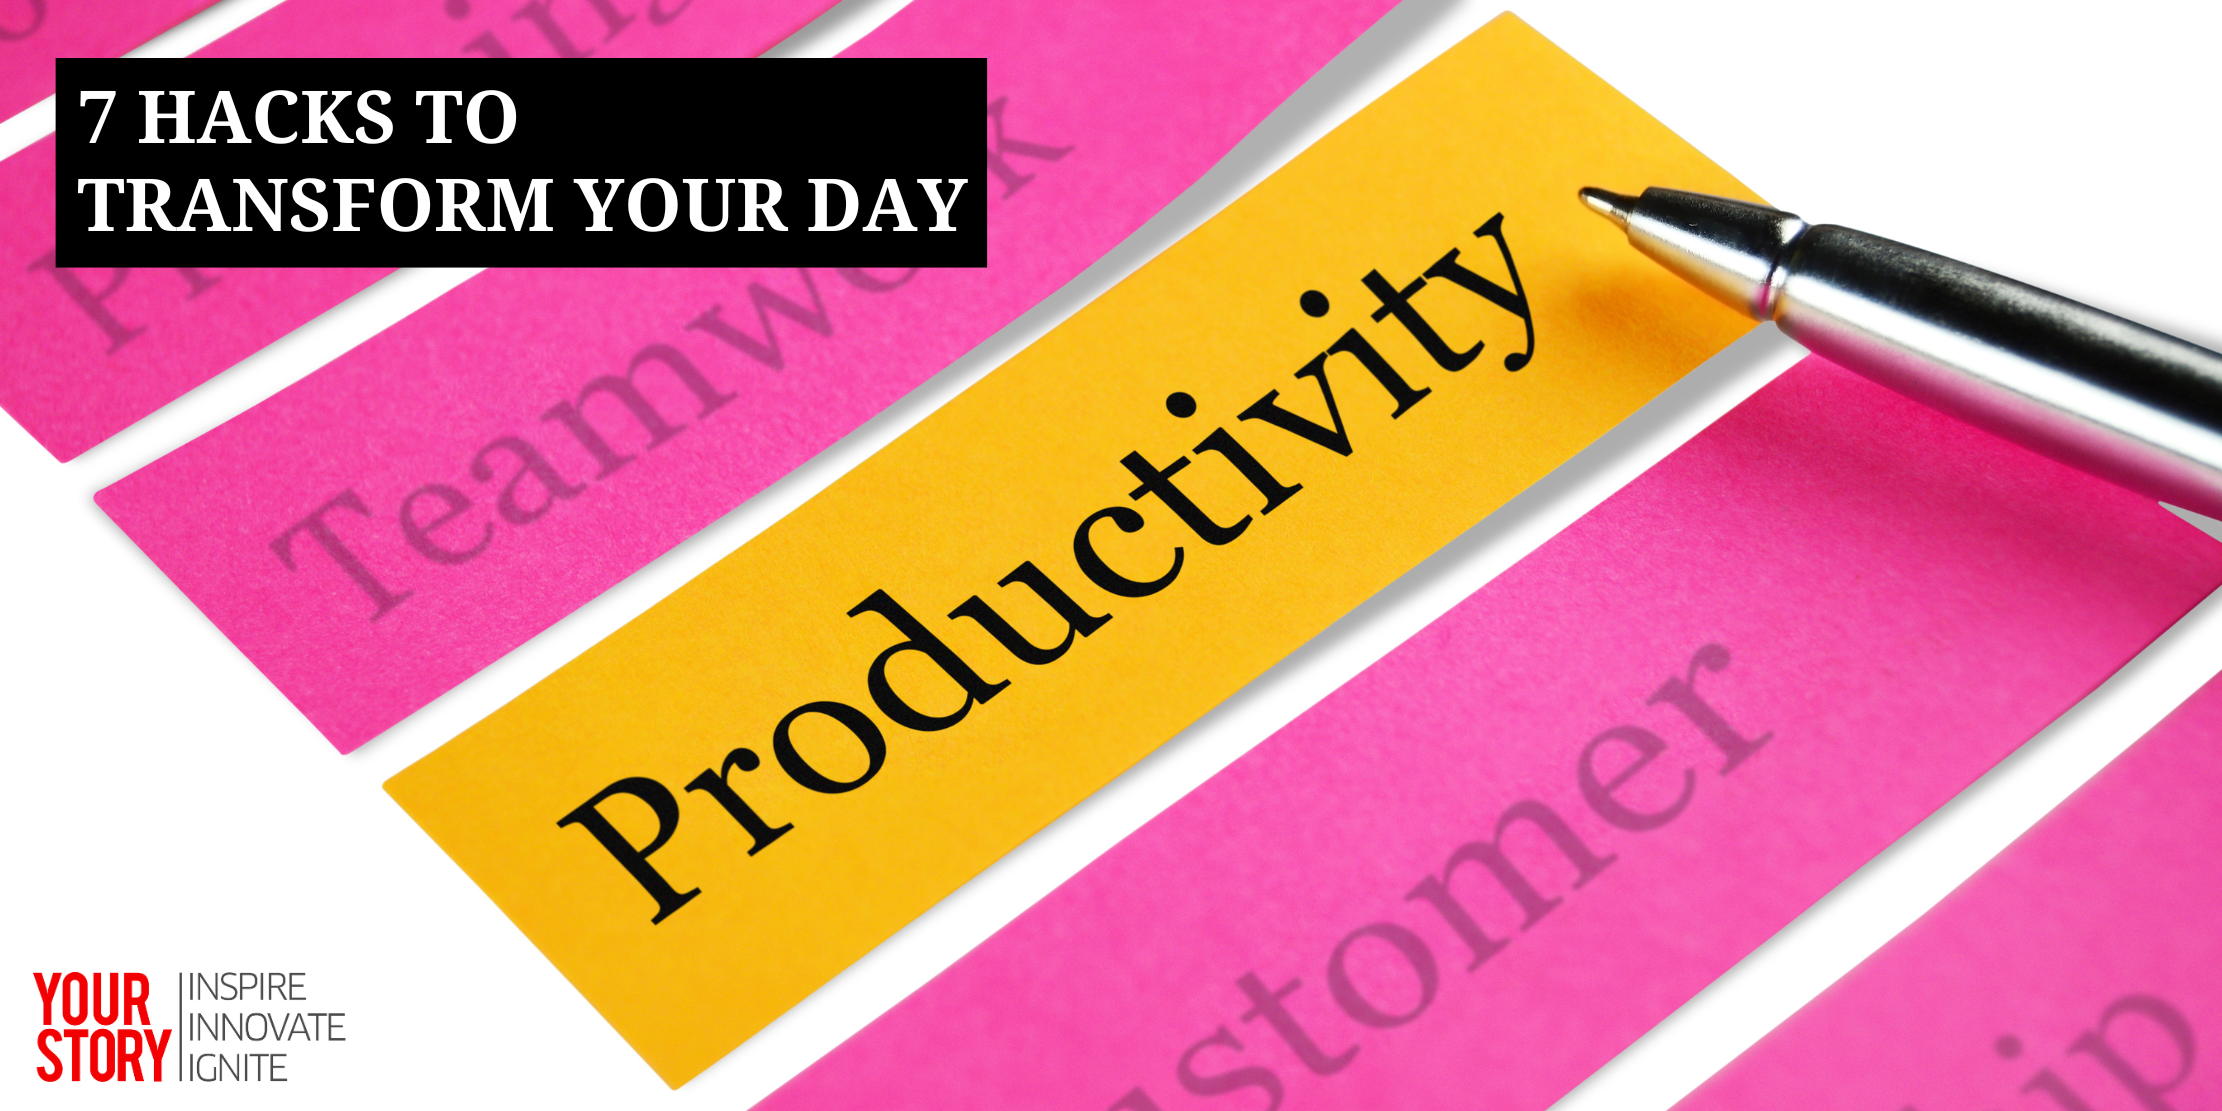 Stop the Scroll, Start the Hustle: 7 Productivity Hacks To Transform Your Day